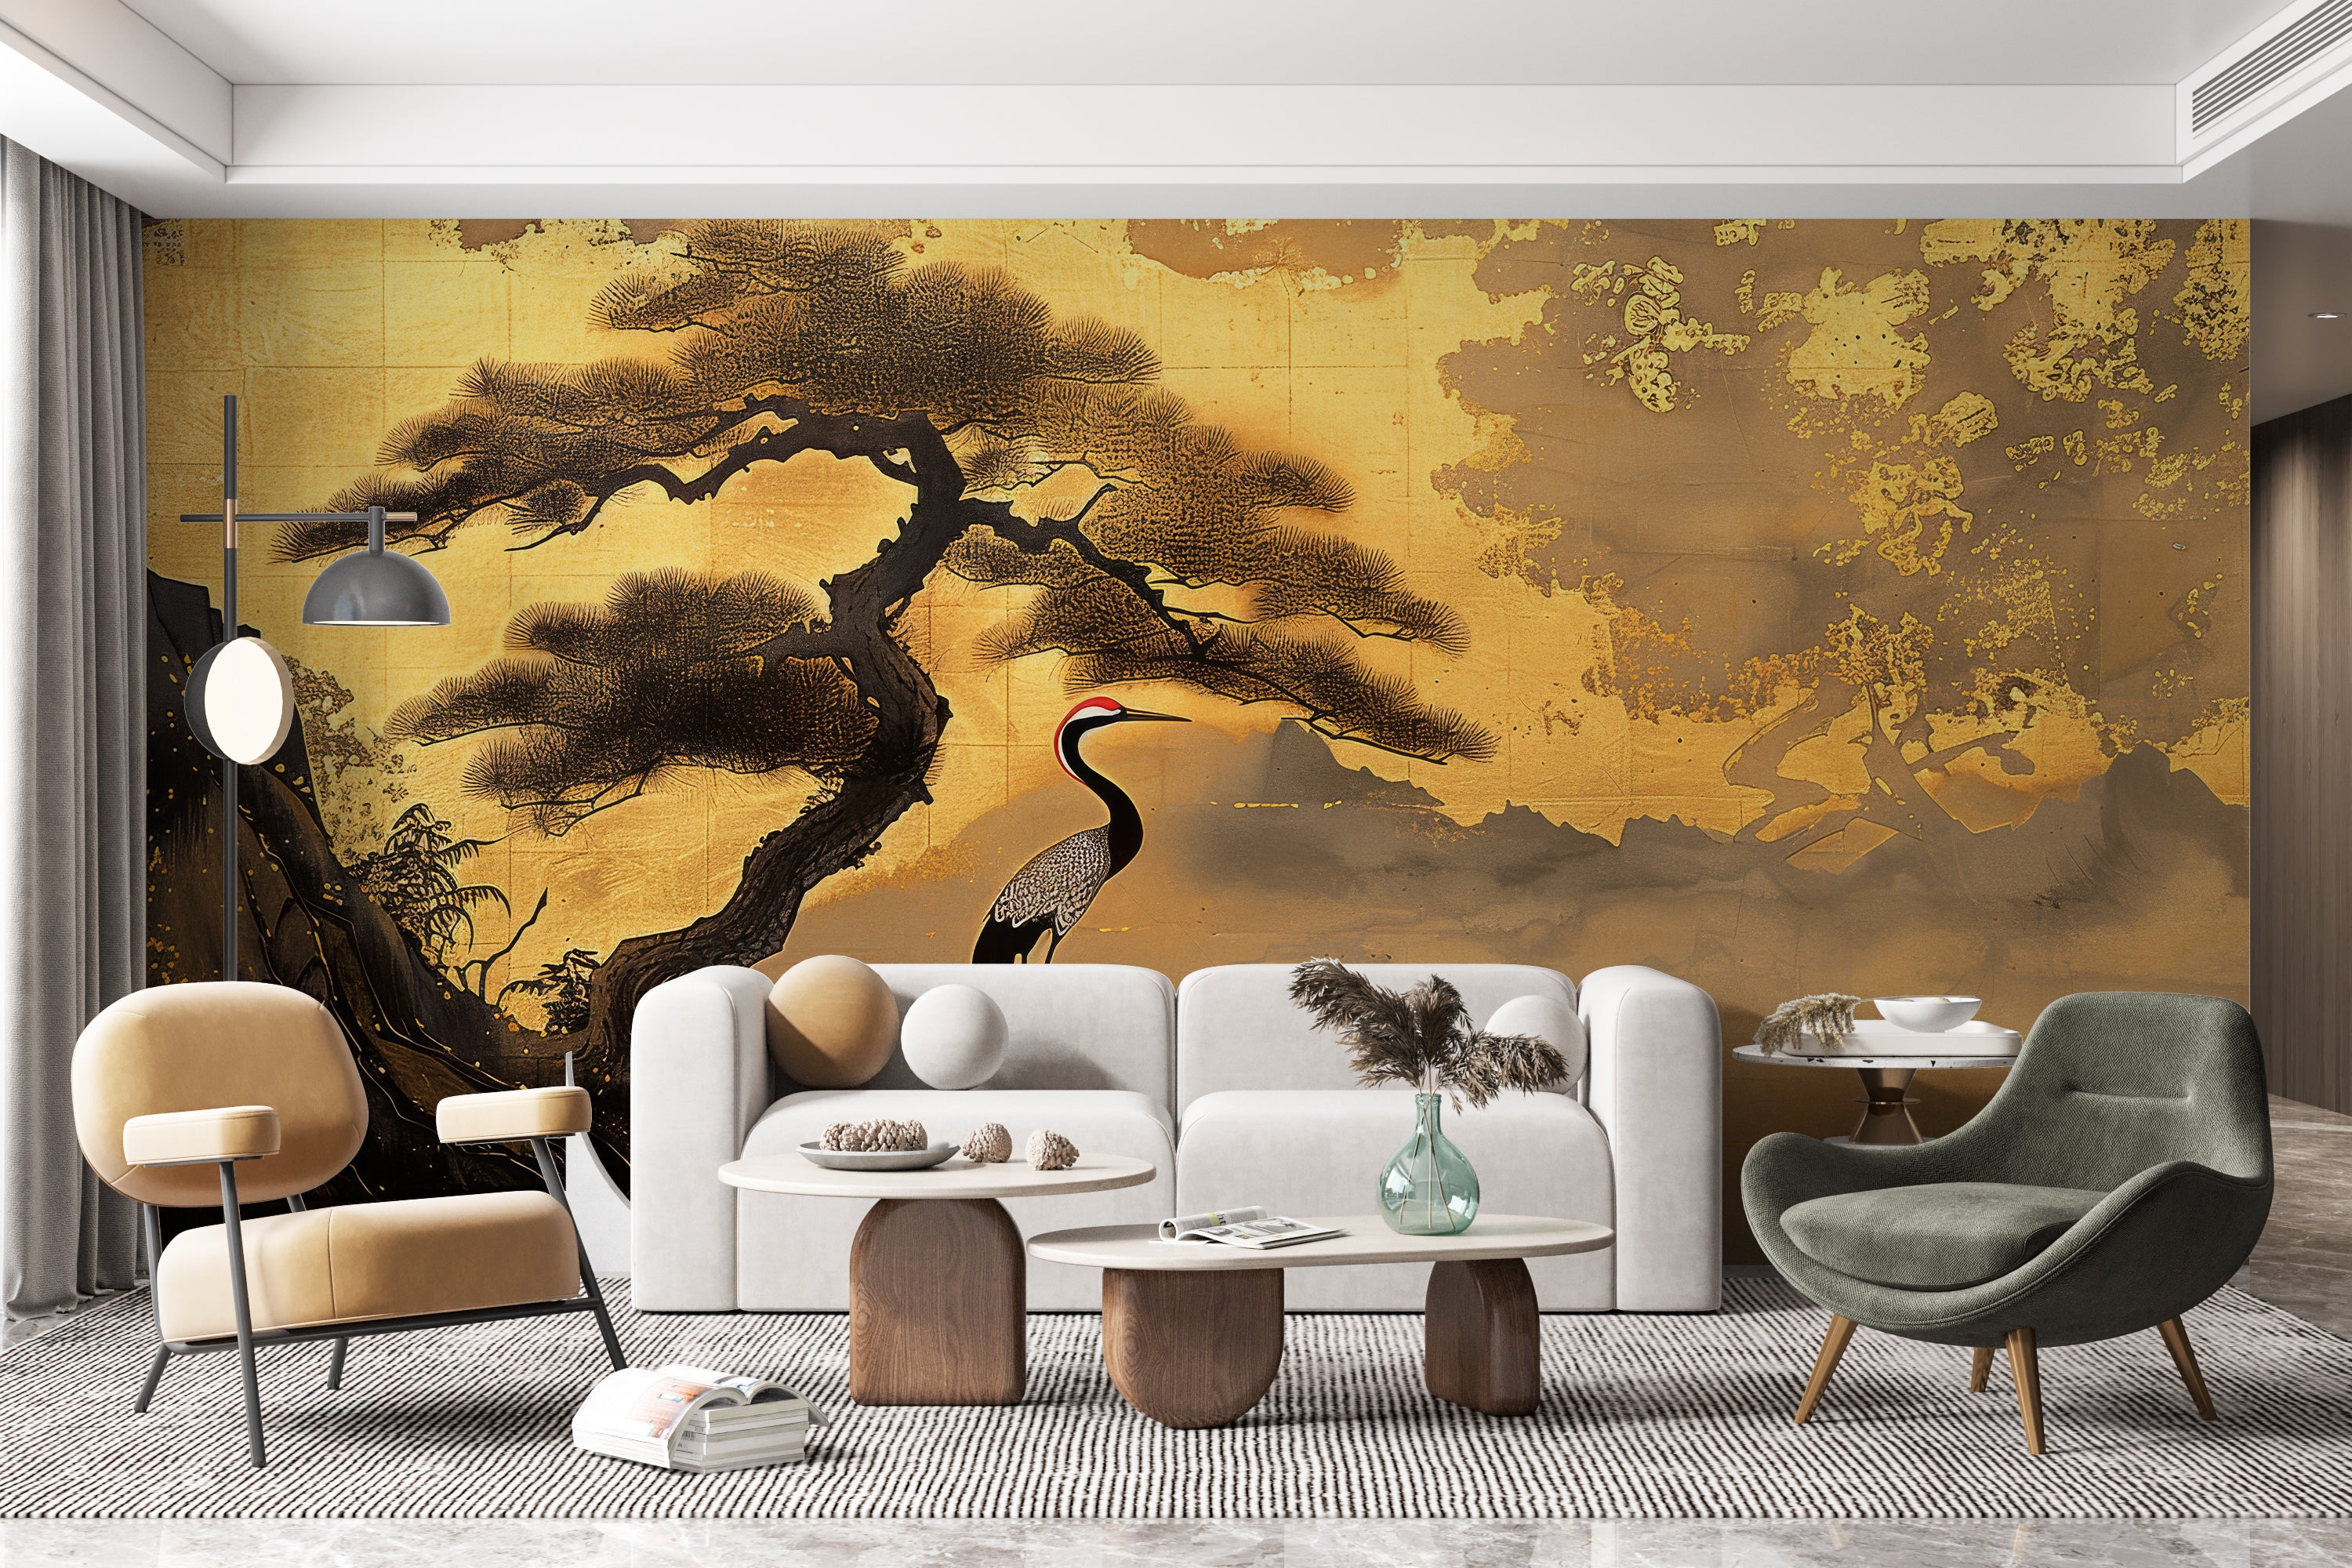 Eternal Tranquility: Panoramic Wallpaper Inspired by Japanese Art